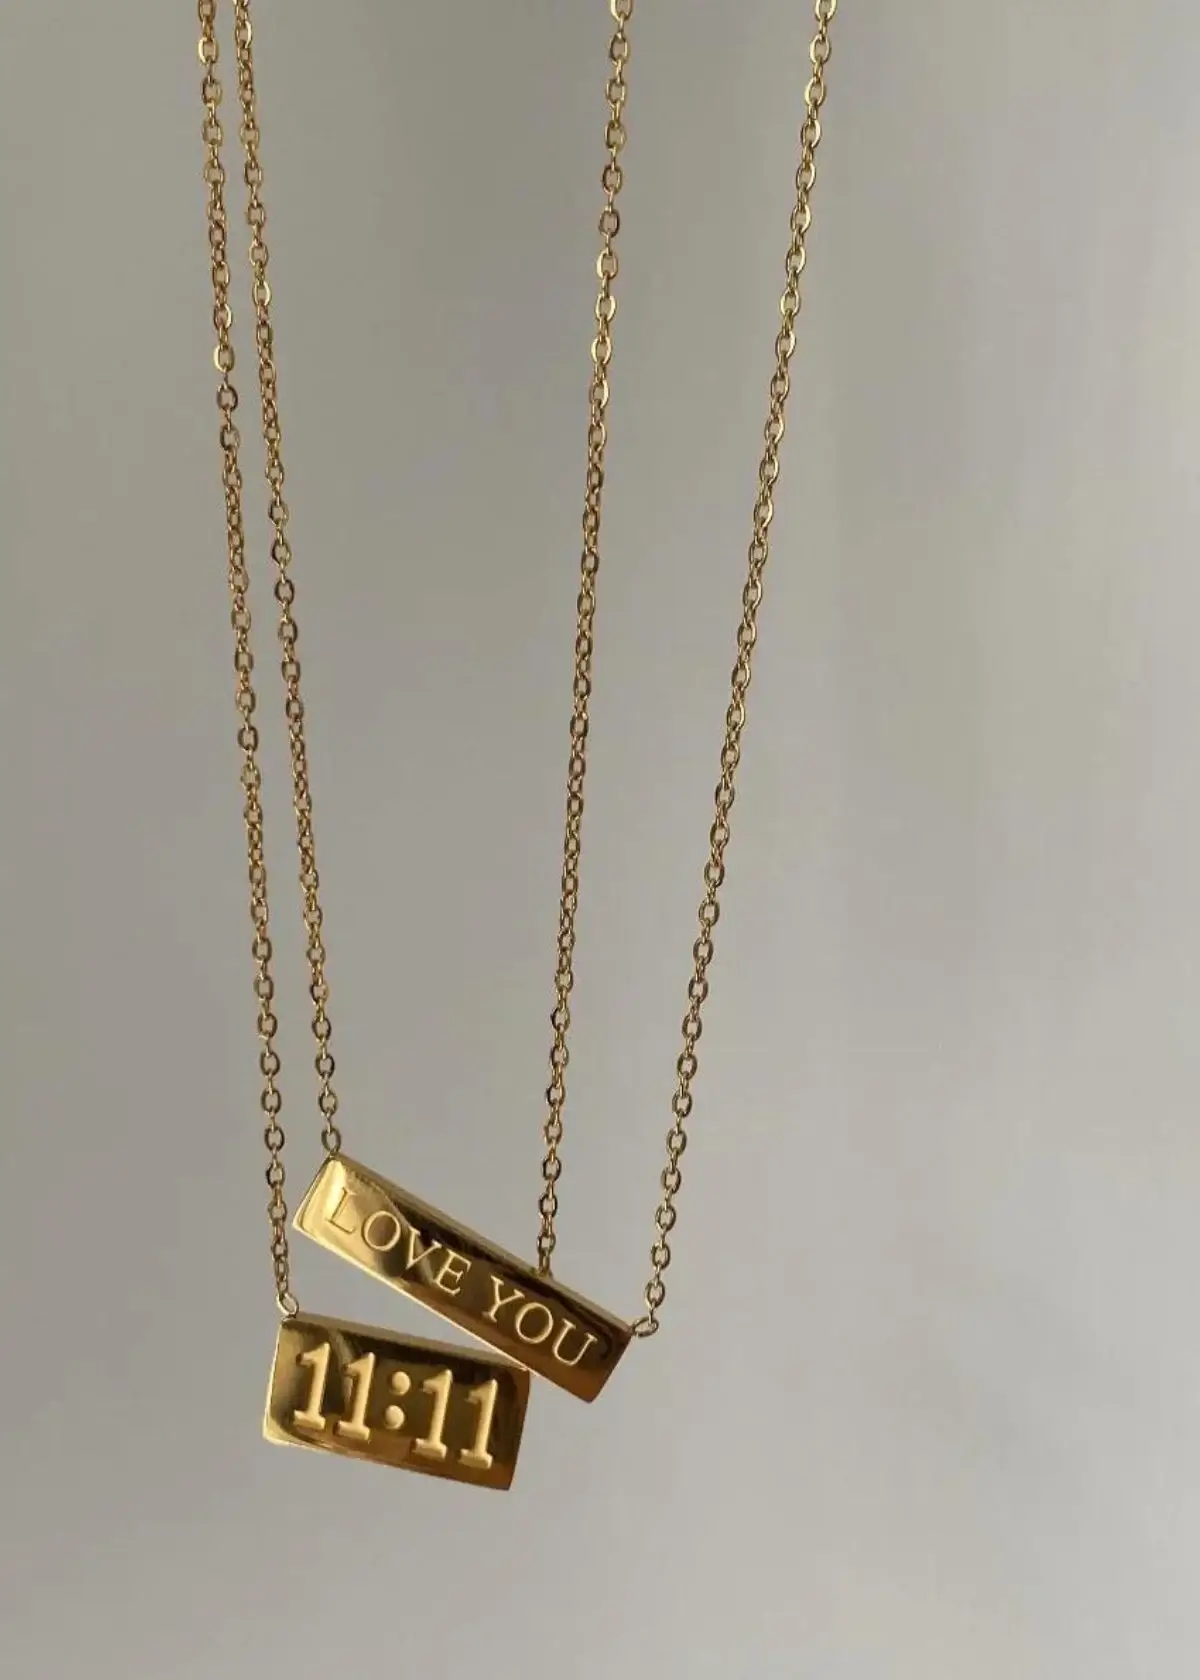 11 11 necklace